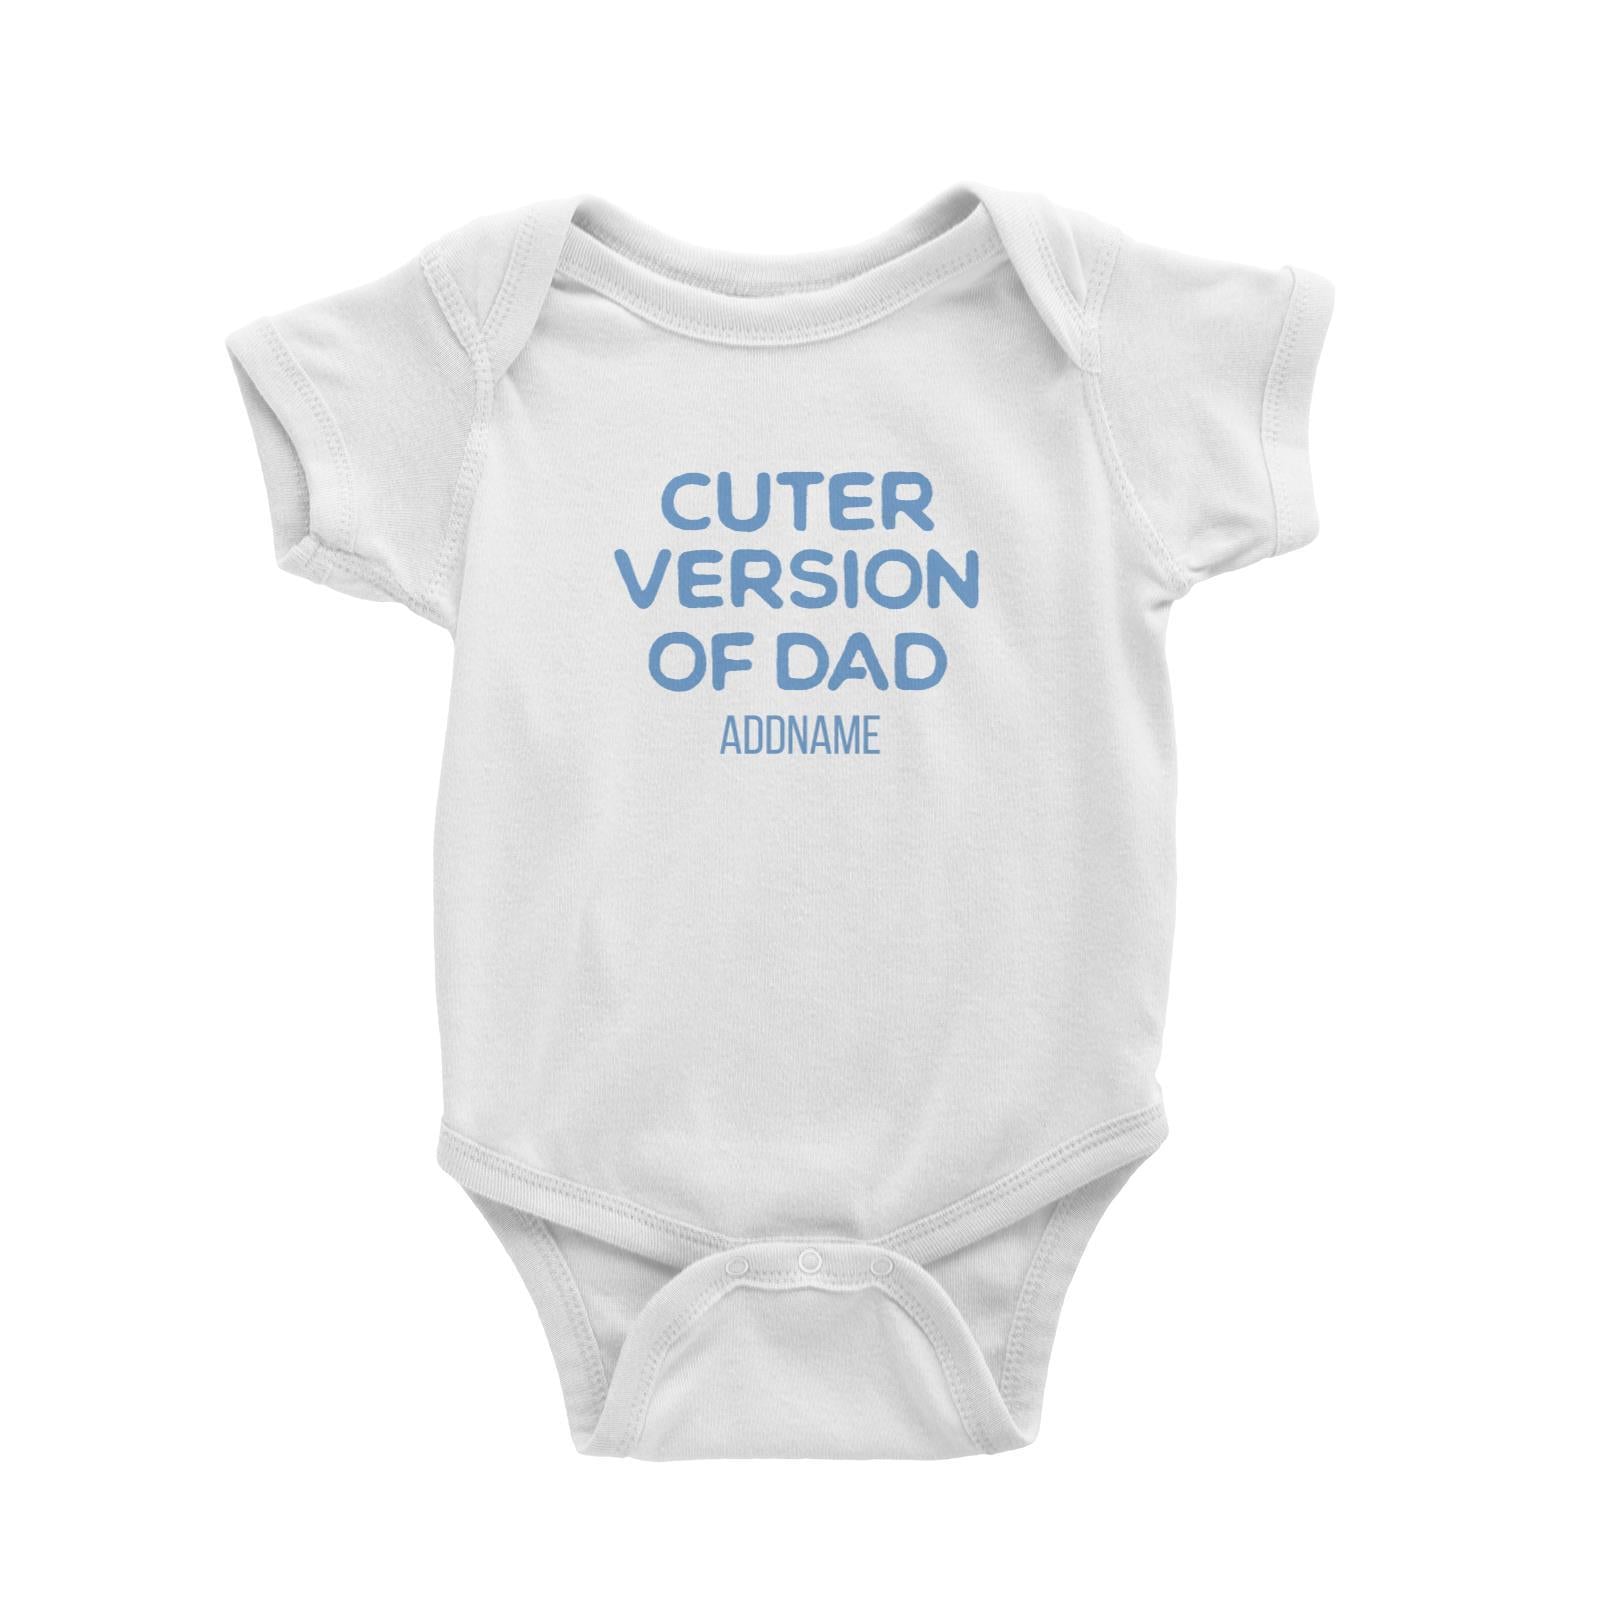 Cuter Version of Dad Addname Baby Romper